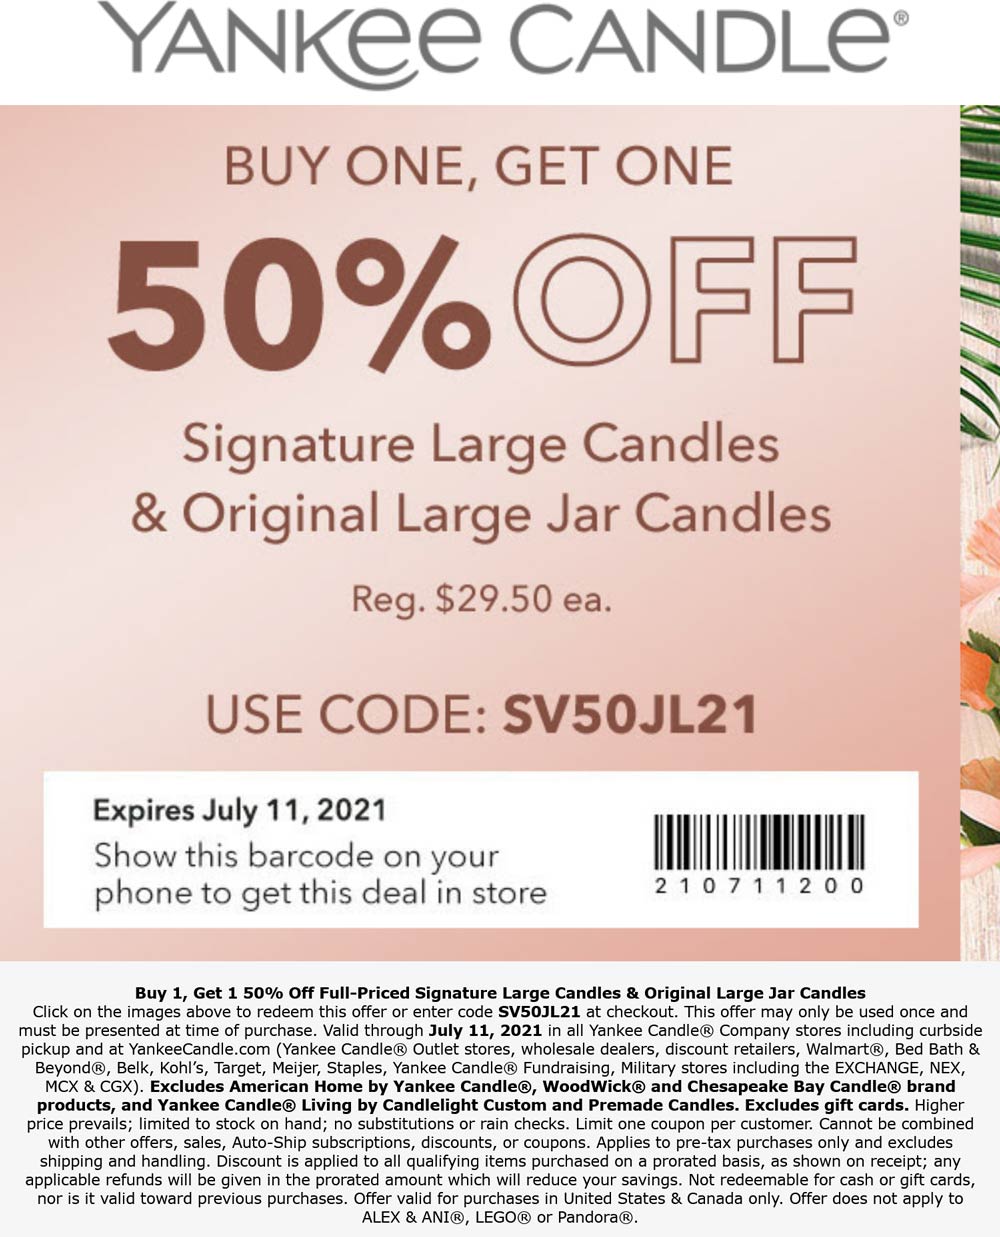 Yankee Candle stores Coupon  Second large candle 50% off at Yankee Candle, or online via promo code SV50JL21 #yankeecandle 